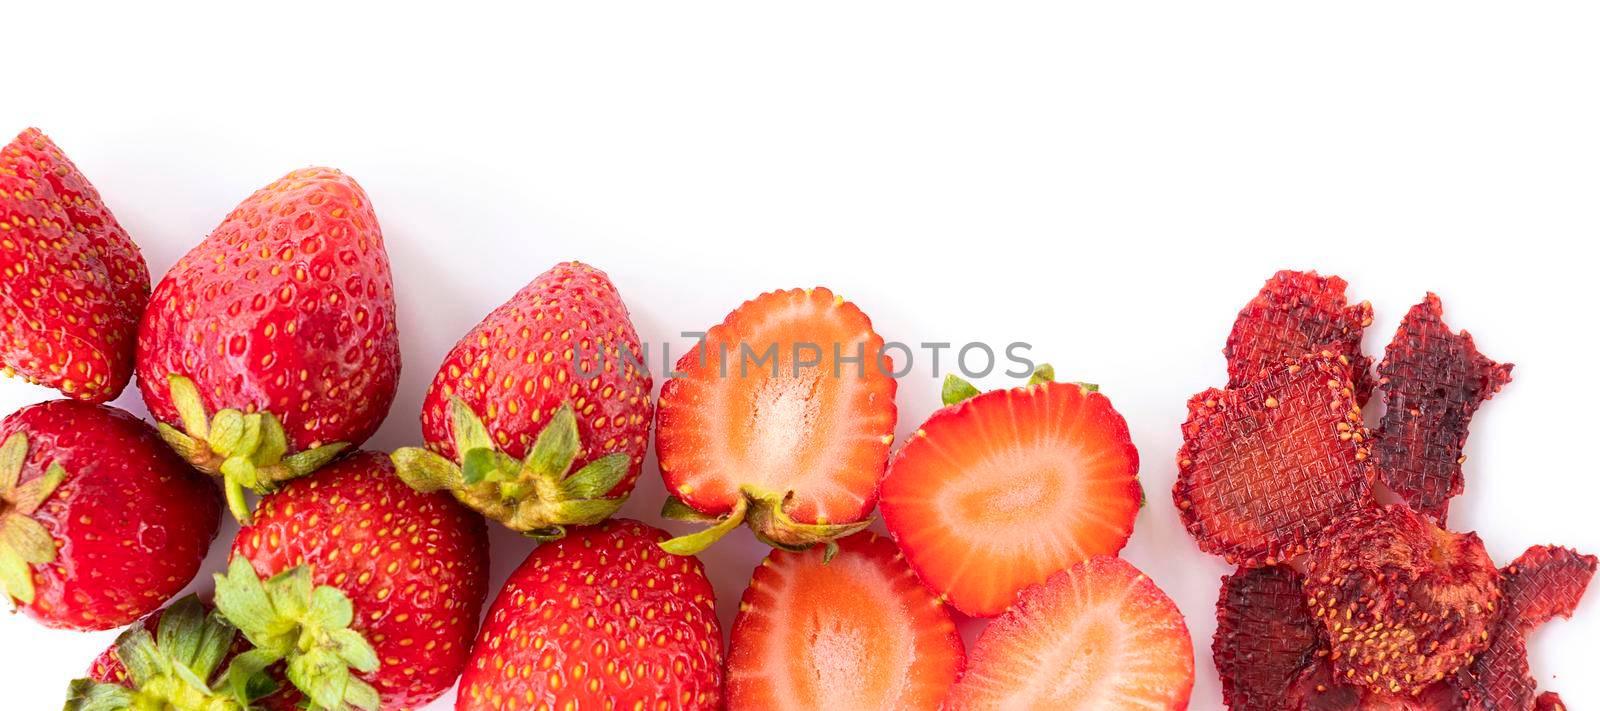 banner with healthy sweets. ripe sweet strawberries, red strawberry slices, dried strawberry pieces. fruit chips. healthy food concept. top view. flat lay